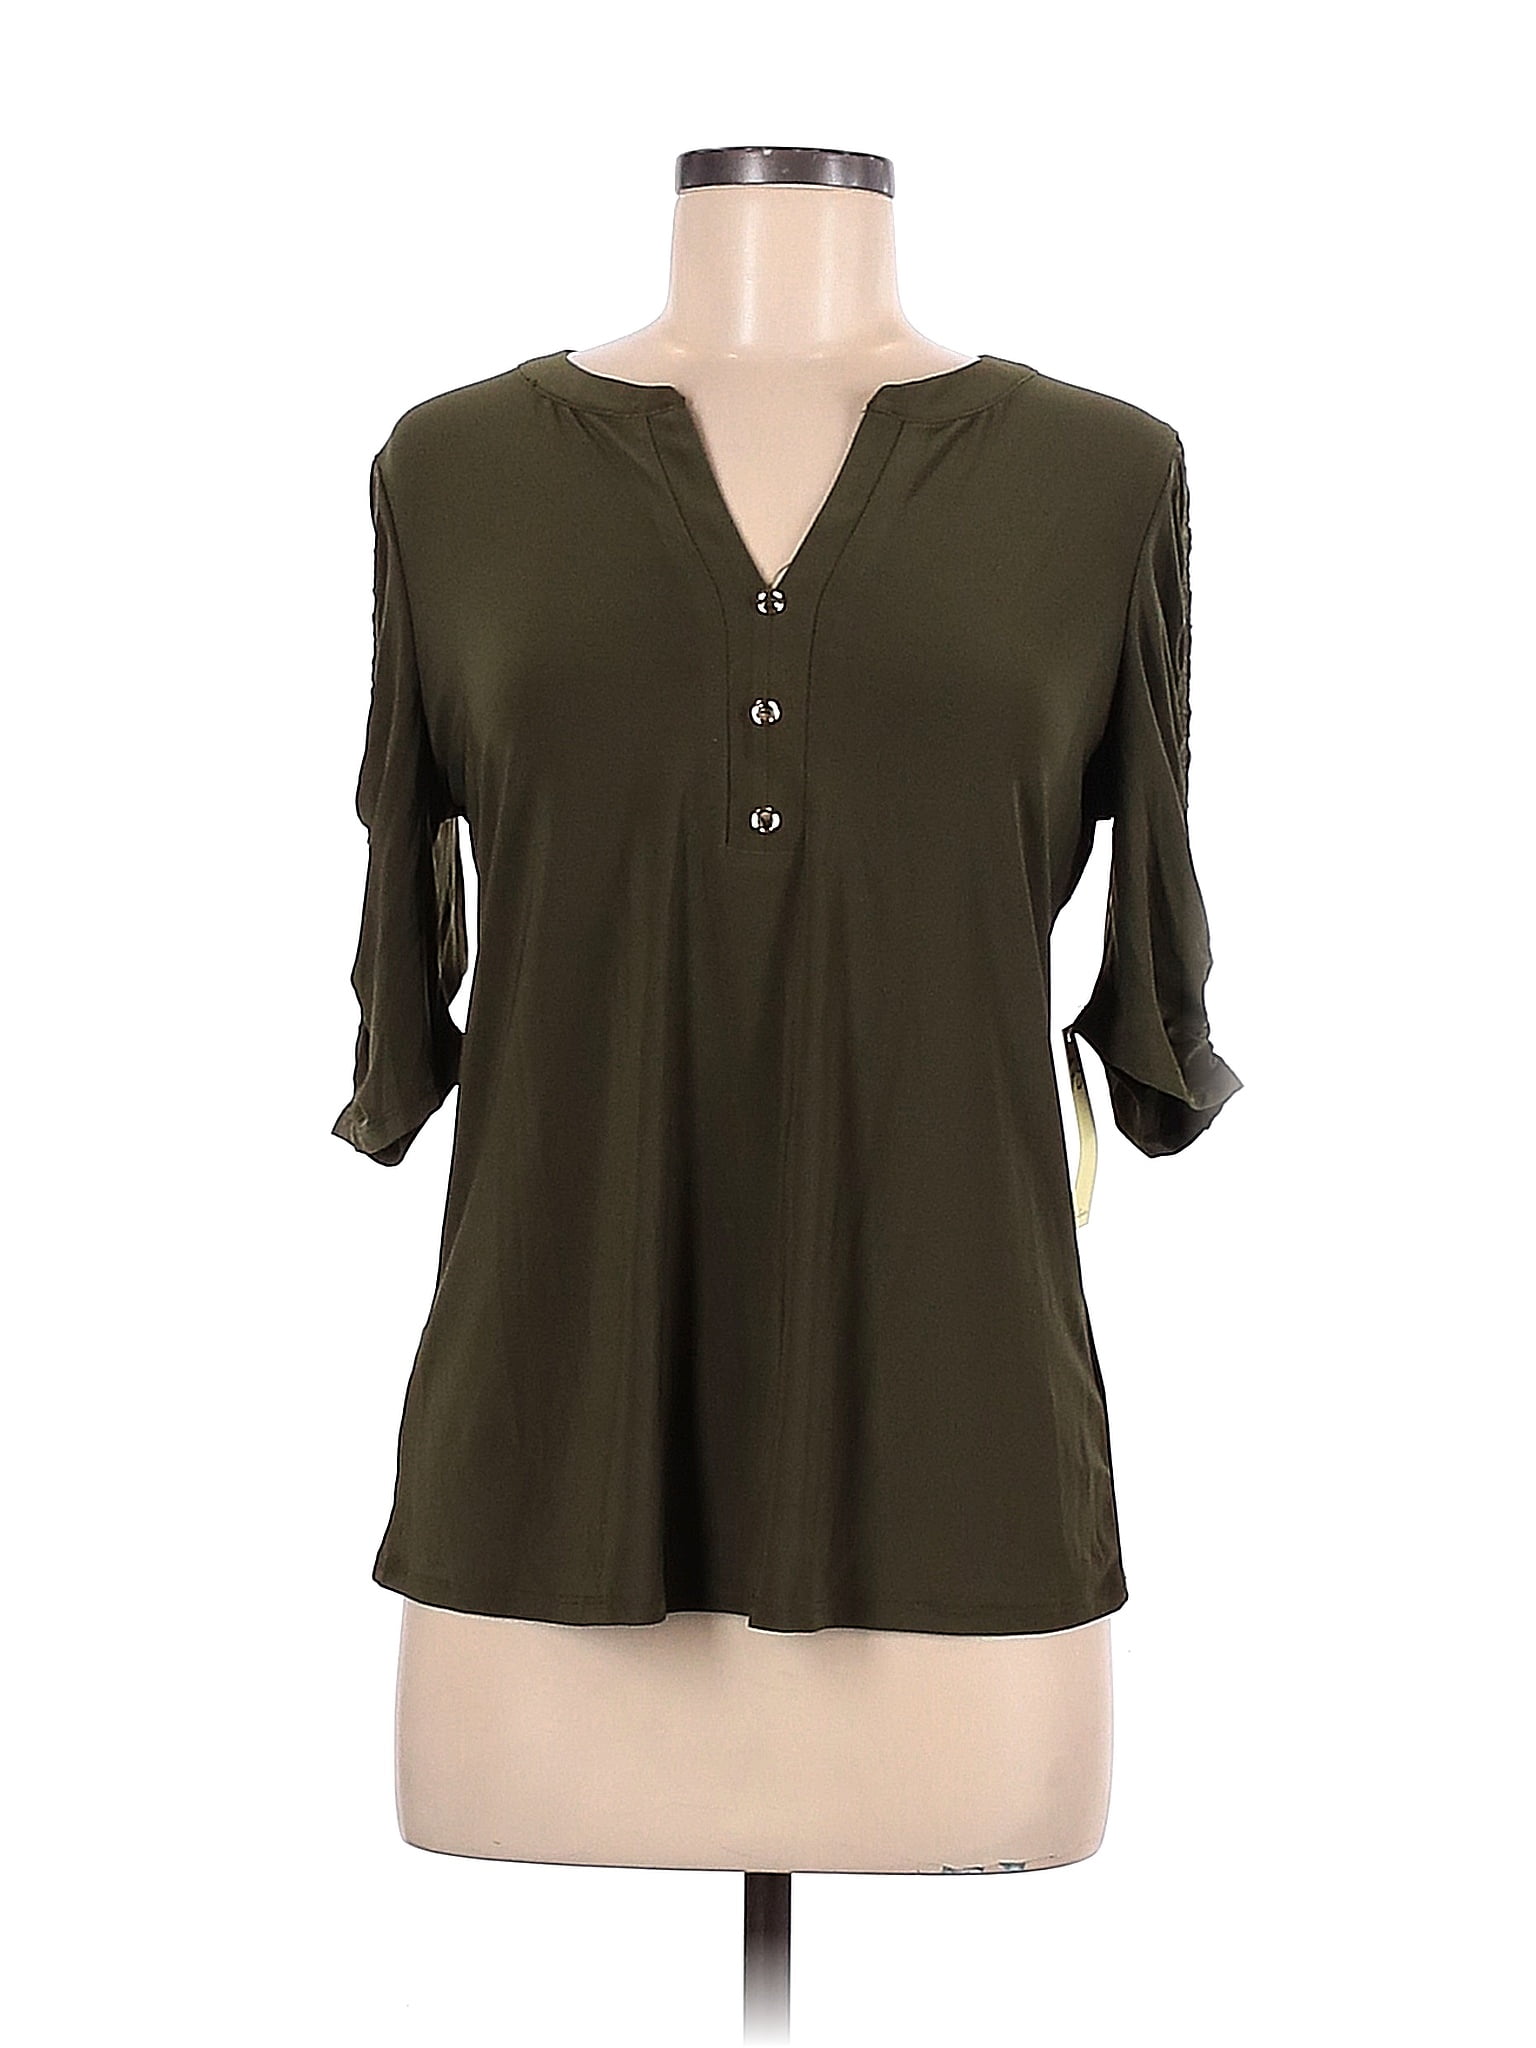 Ross dress for less Green Brown 3/4 Sleeve Top Size M - 56% off | thredUP